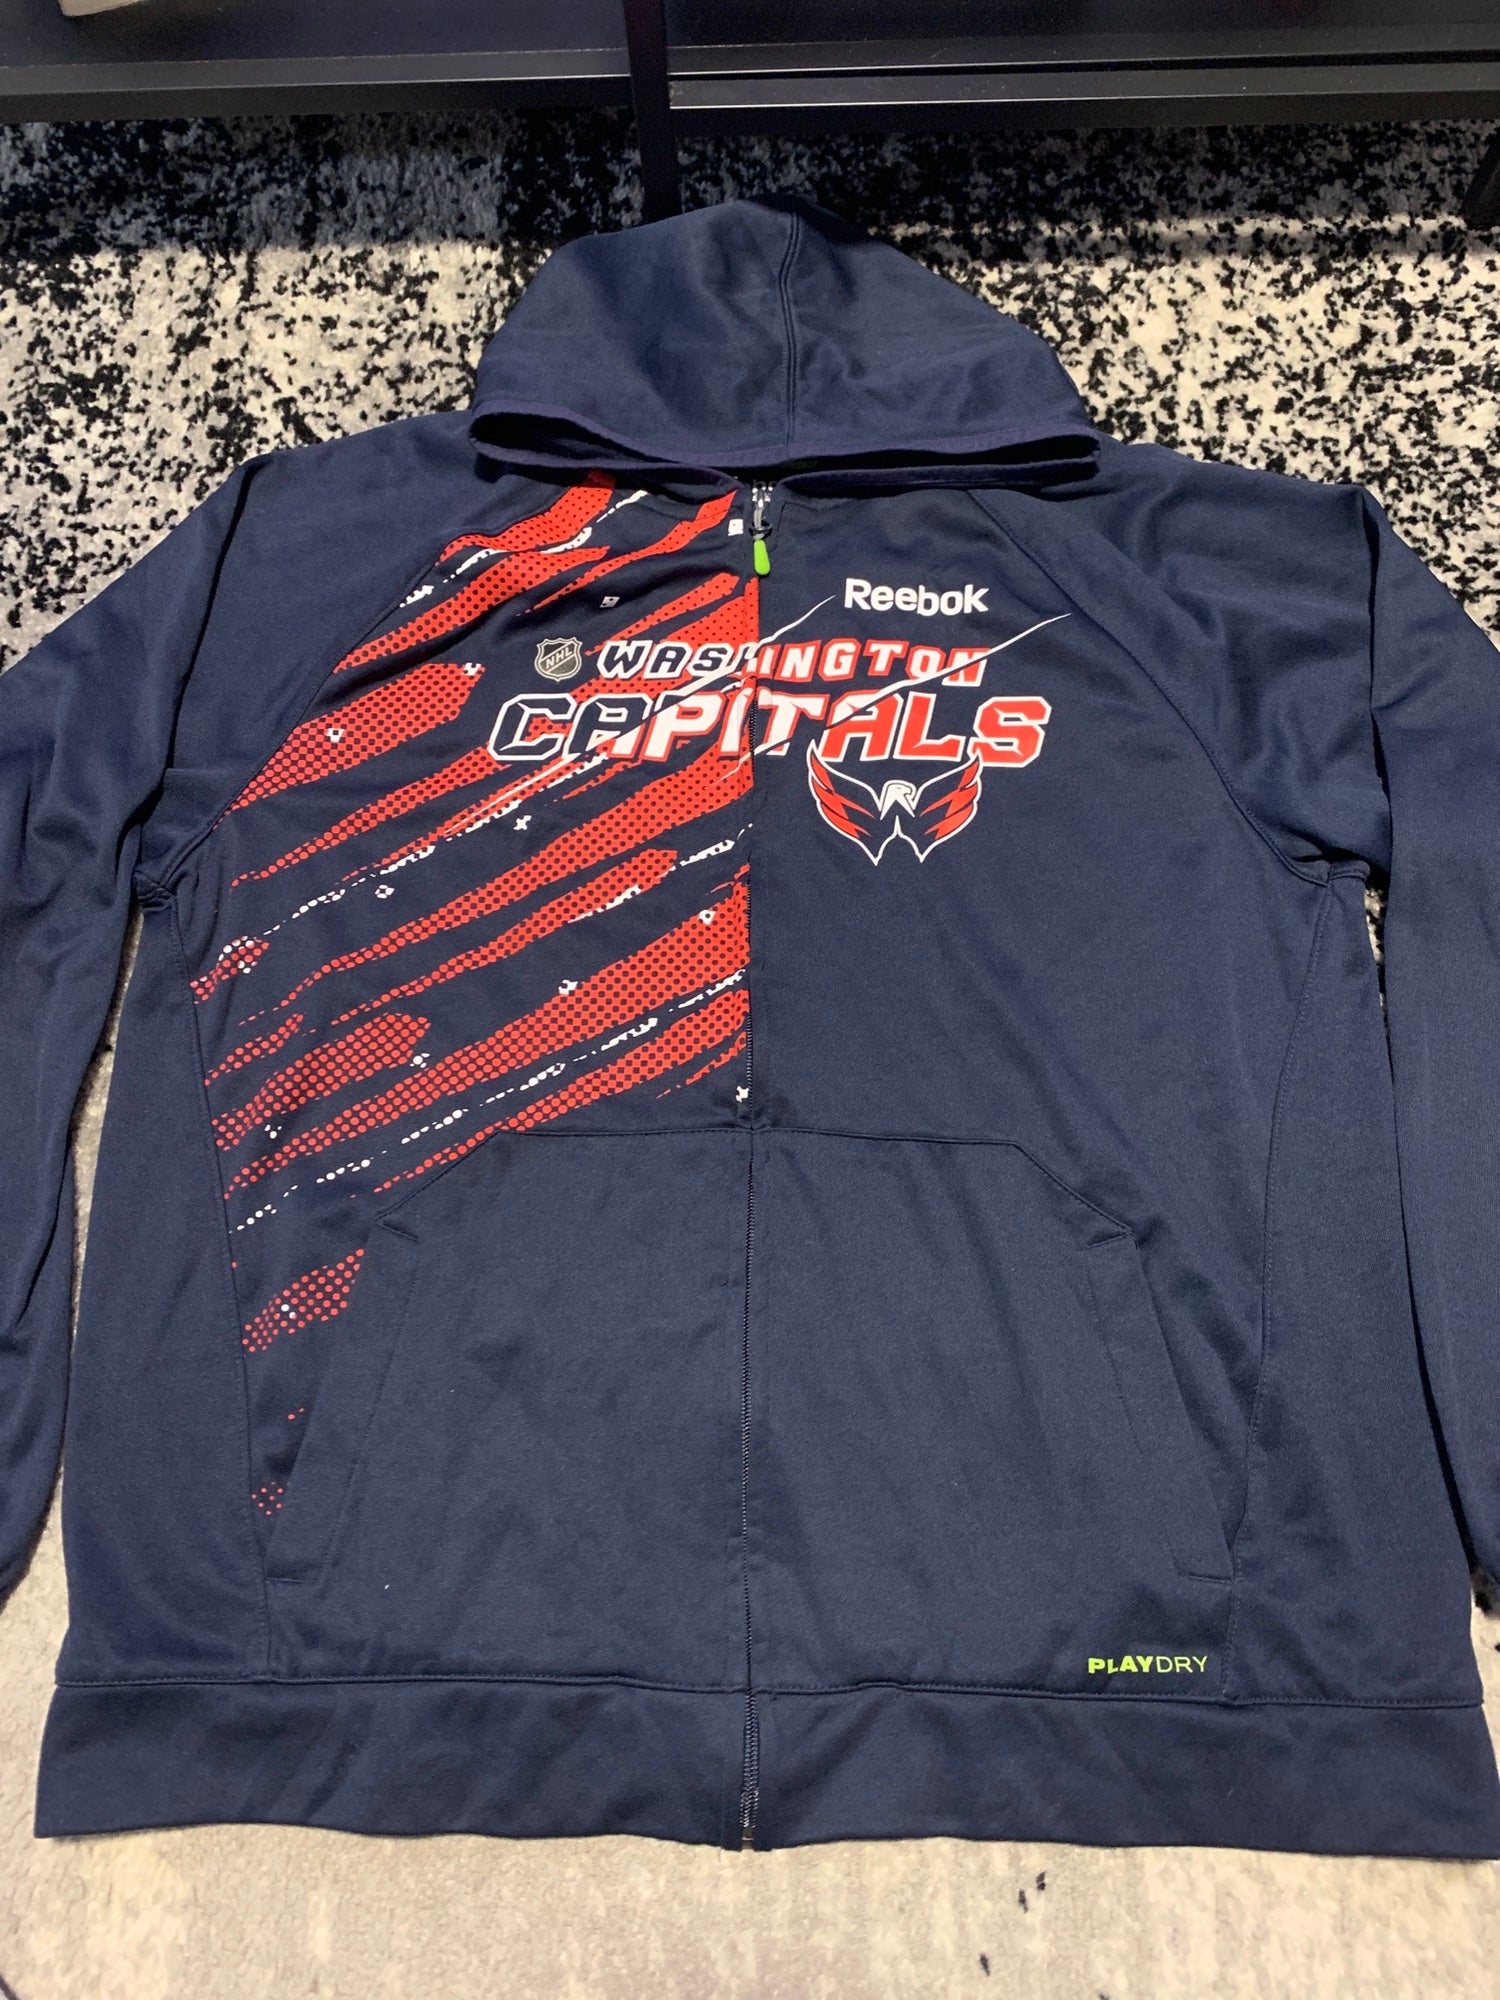 Washington Capitals NHL Reebok Fleece Lined Full Zip Hoodie Men's L -  clothing & accessories - by owner - apparel sale